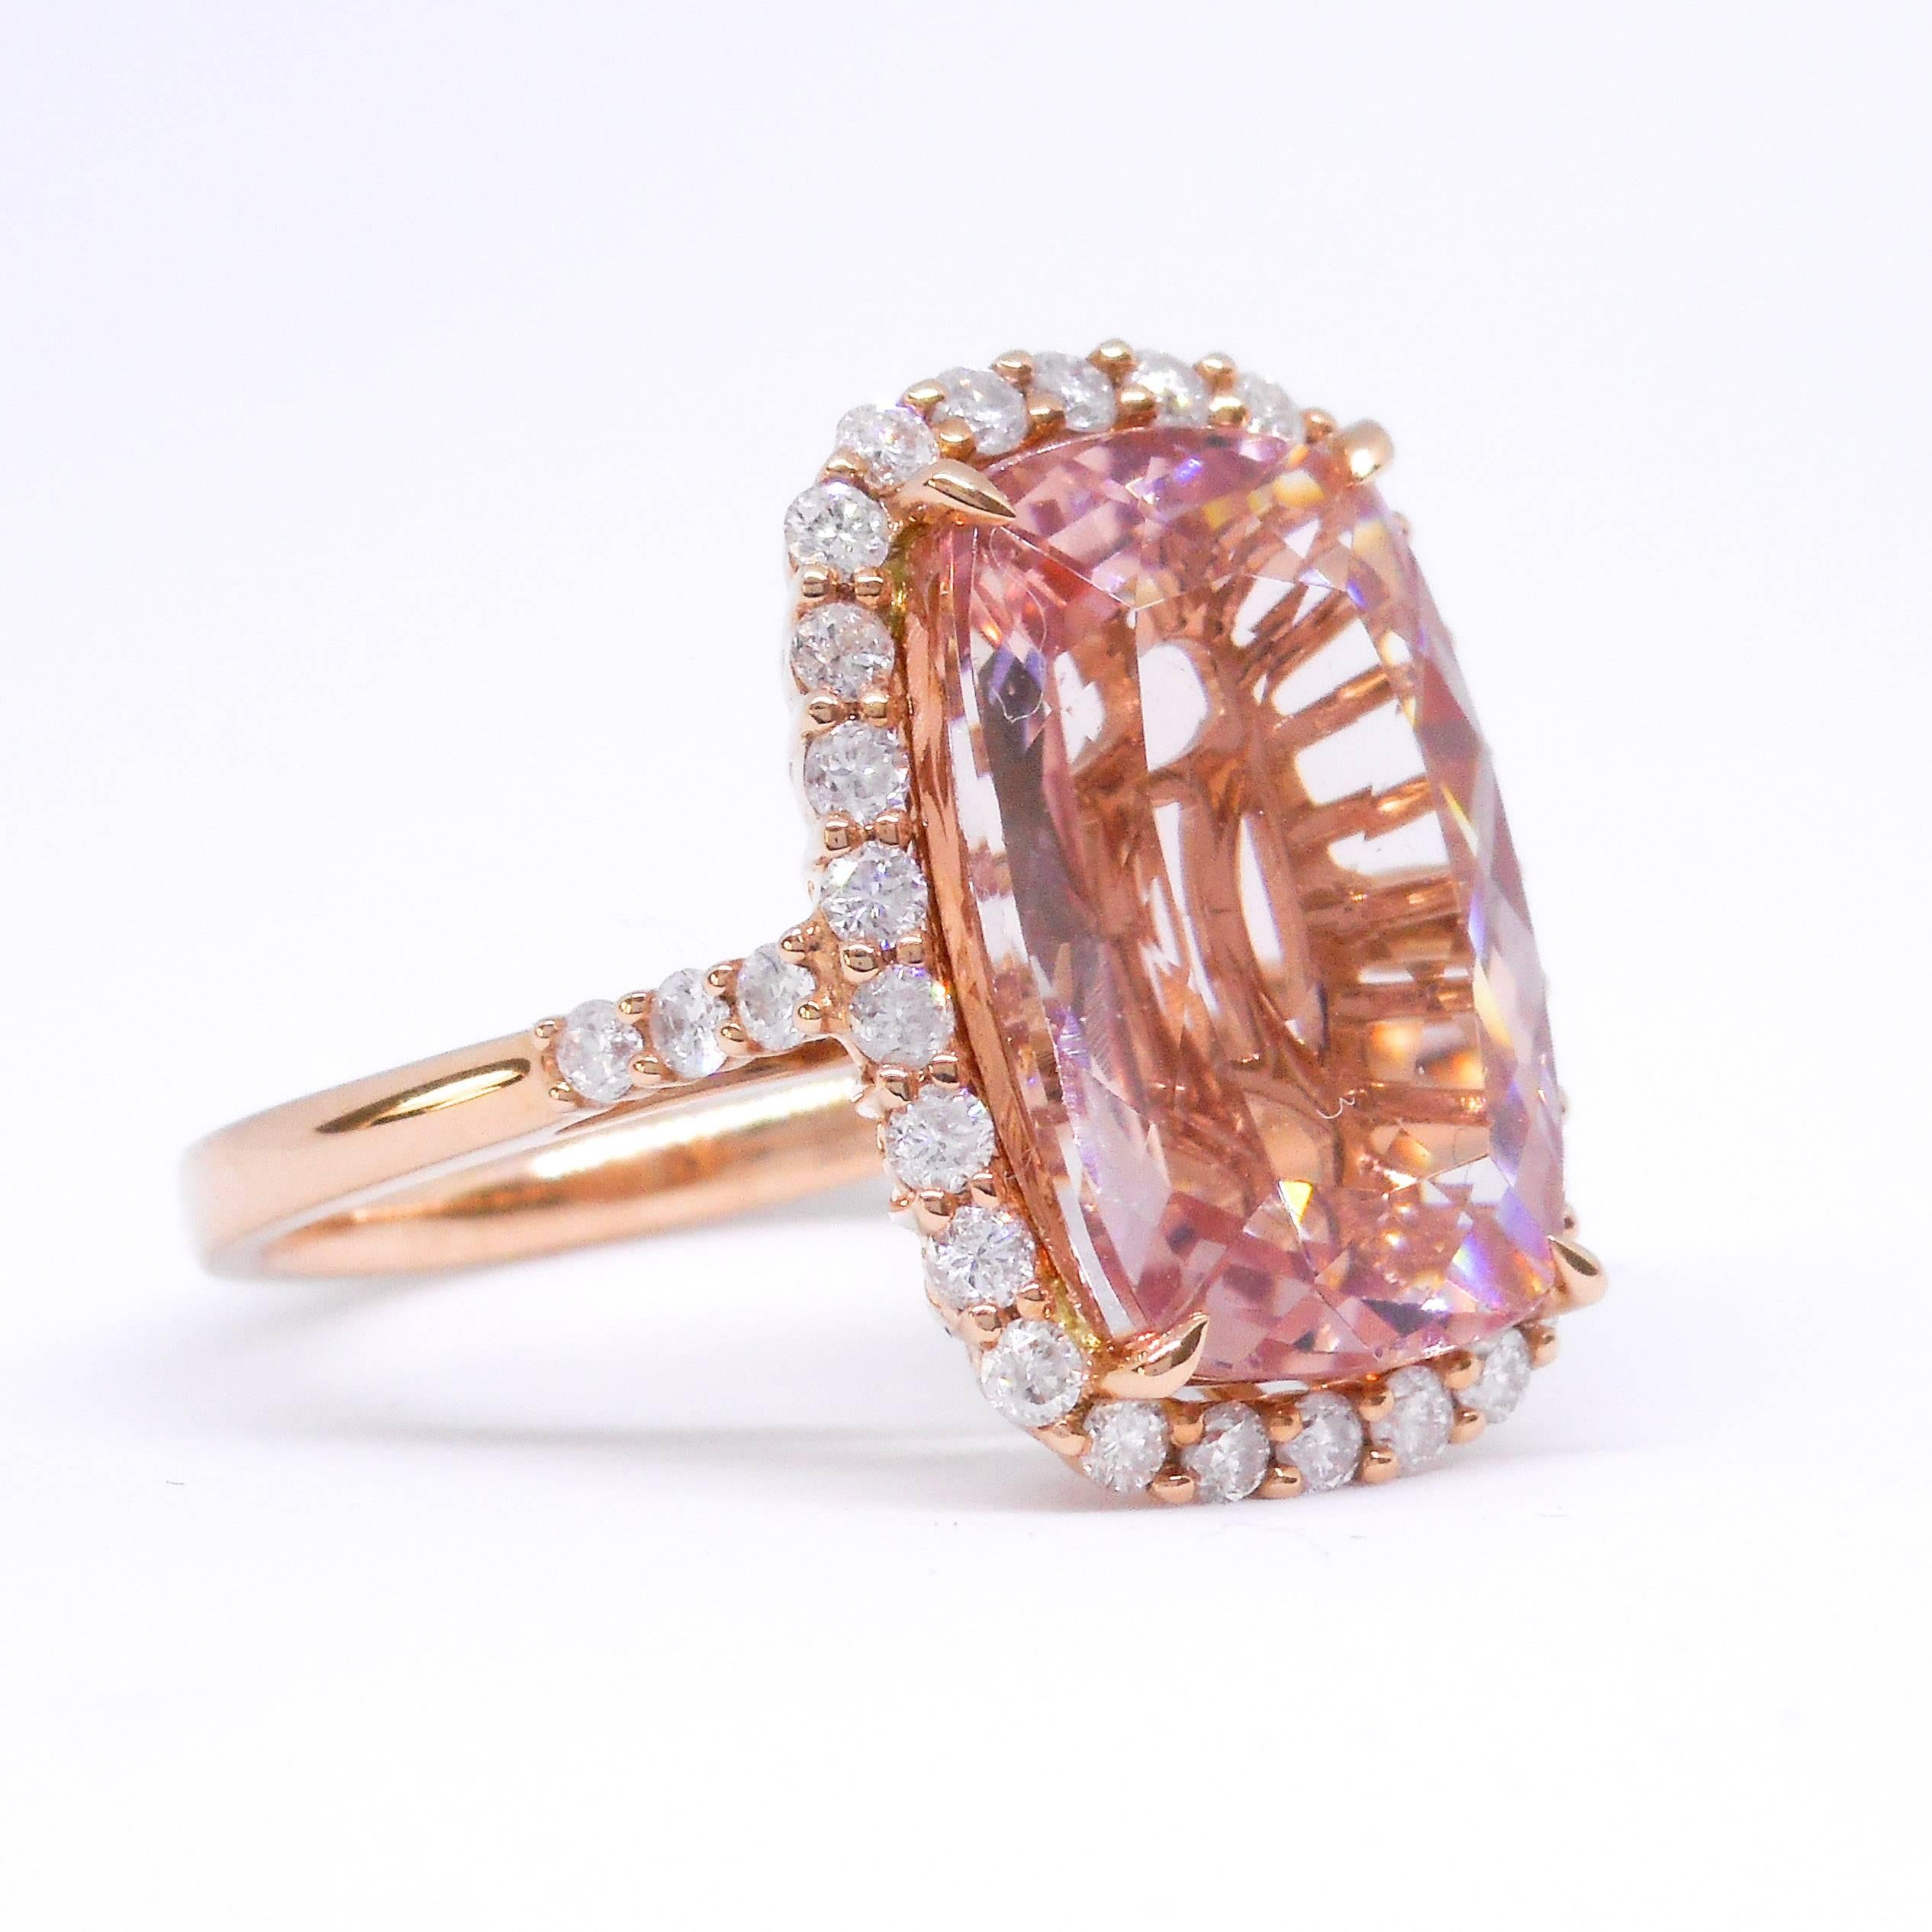 8.44 Carat Morganite and Diamond 18 Carat Rose Gold Ring by Cartmer Jewellery

One 8.44 Carat Morganite
32 Round Brilliant Diamonds totalling 0.77 Carat
18 Carat Rose Gold
Resize and Appraisal option is available

FREE express postage usually 3-4